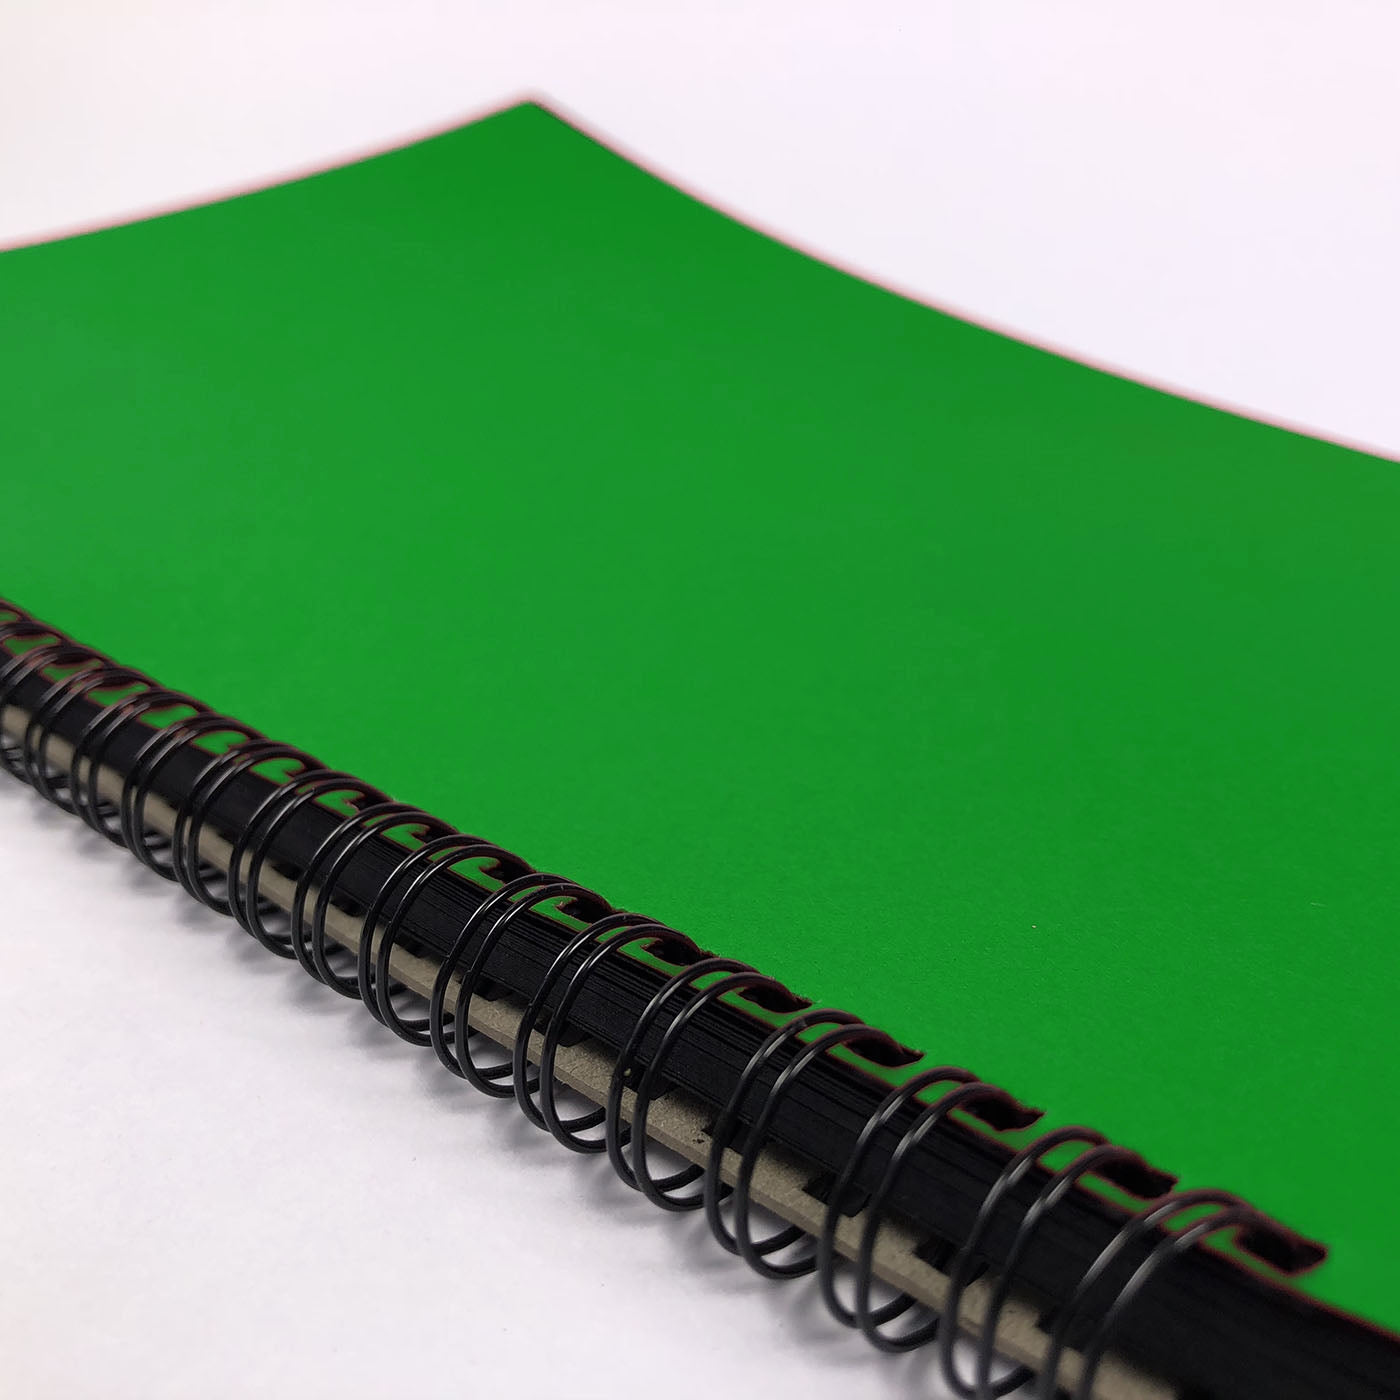 Oversize A4 Hardback Project Book Green Cover Black Pages